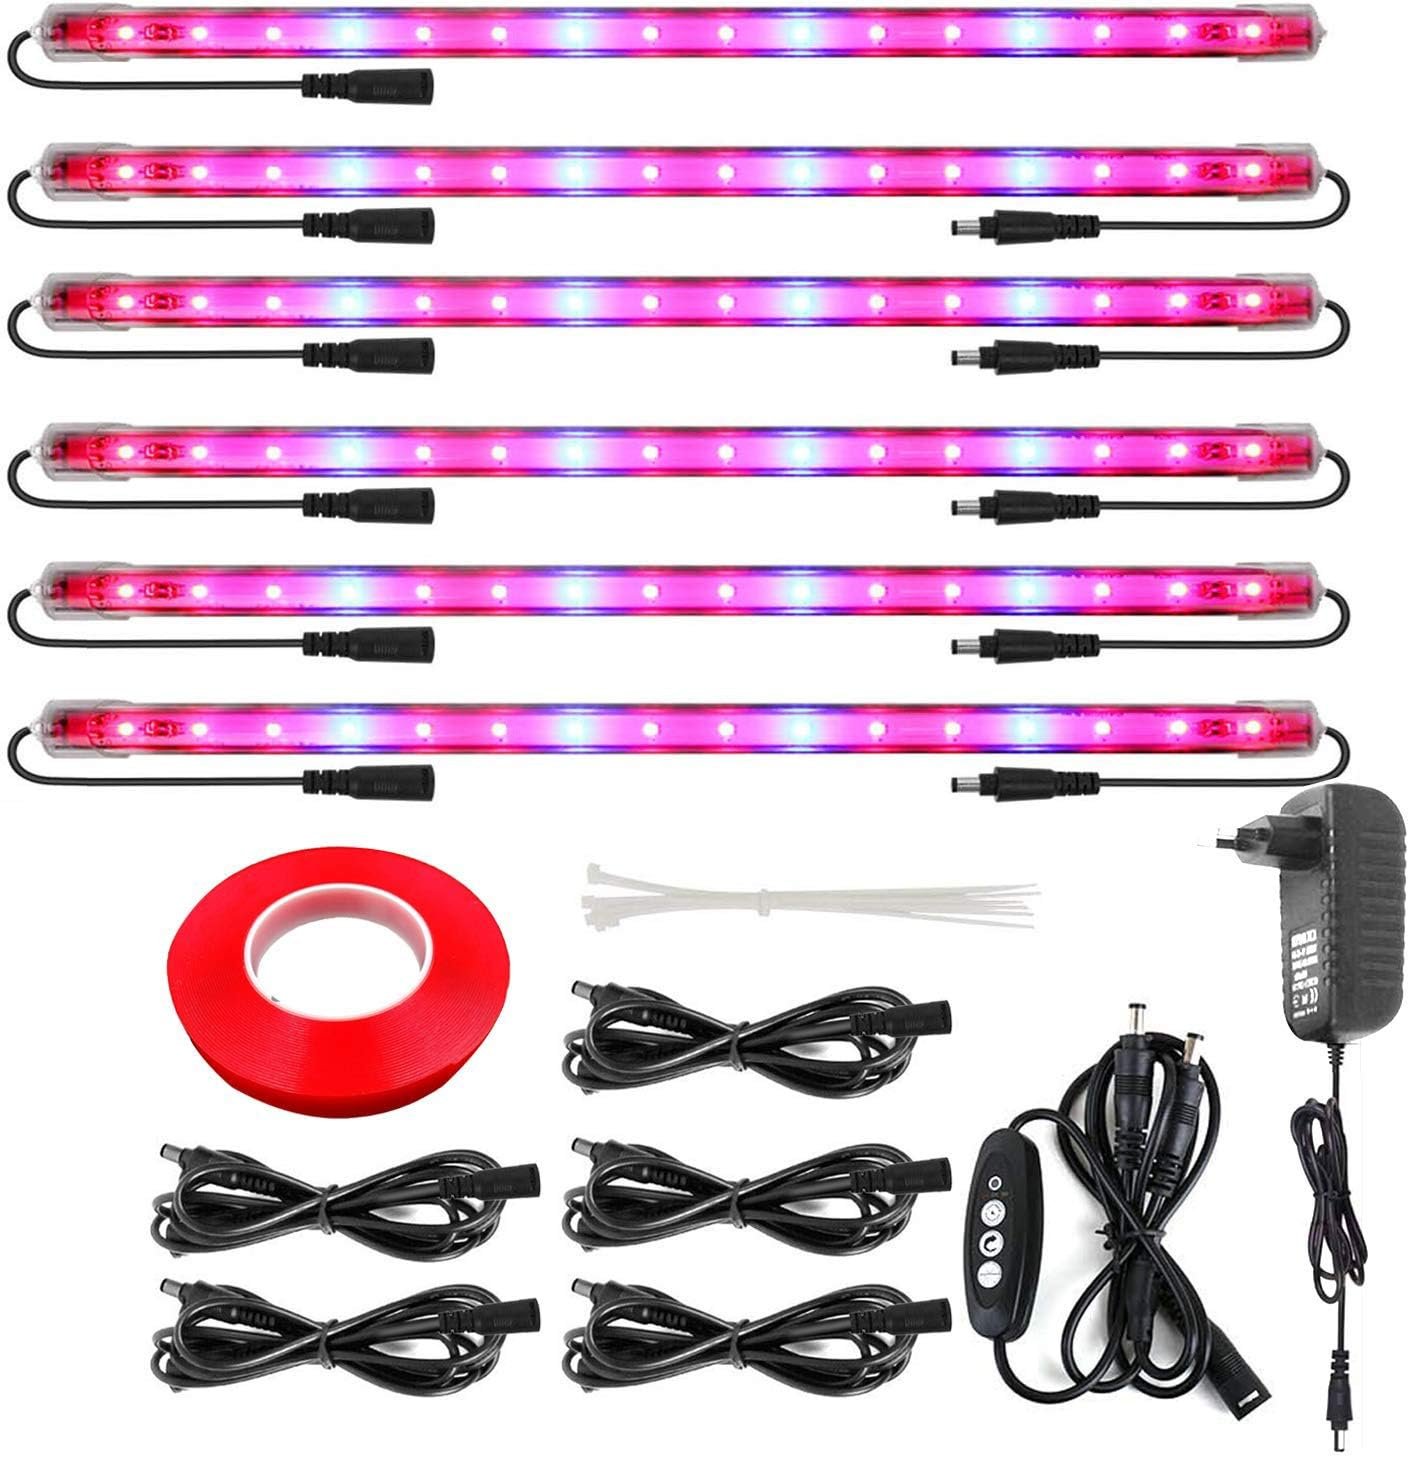 roleadro led grow light strips review